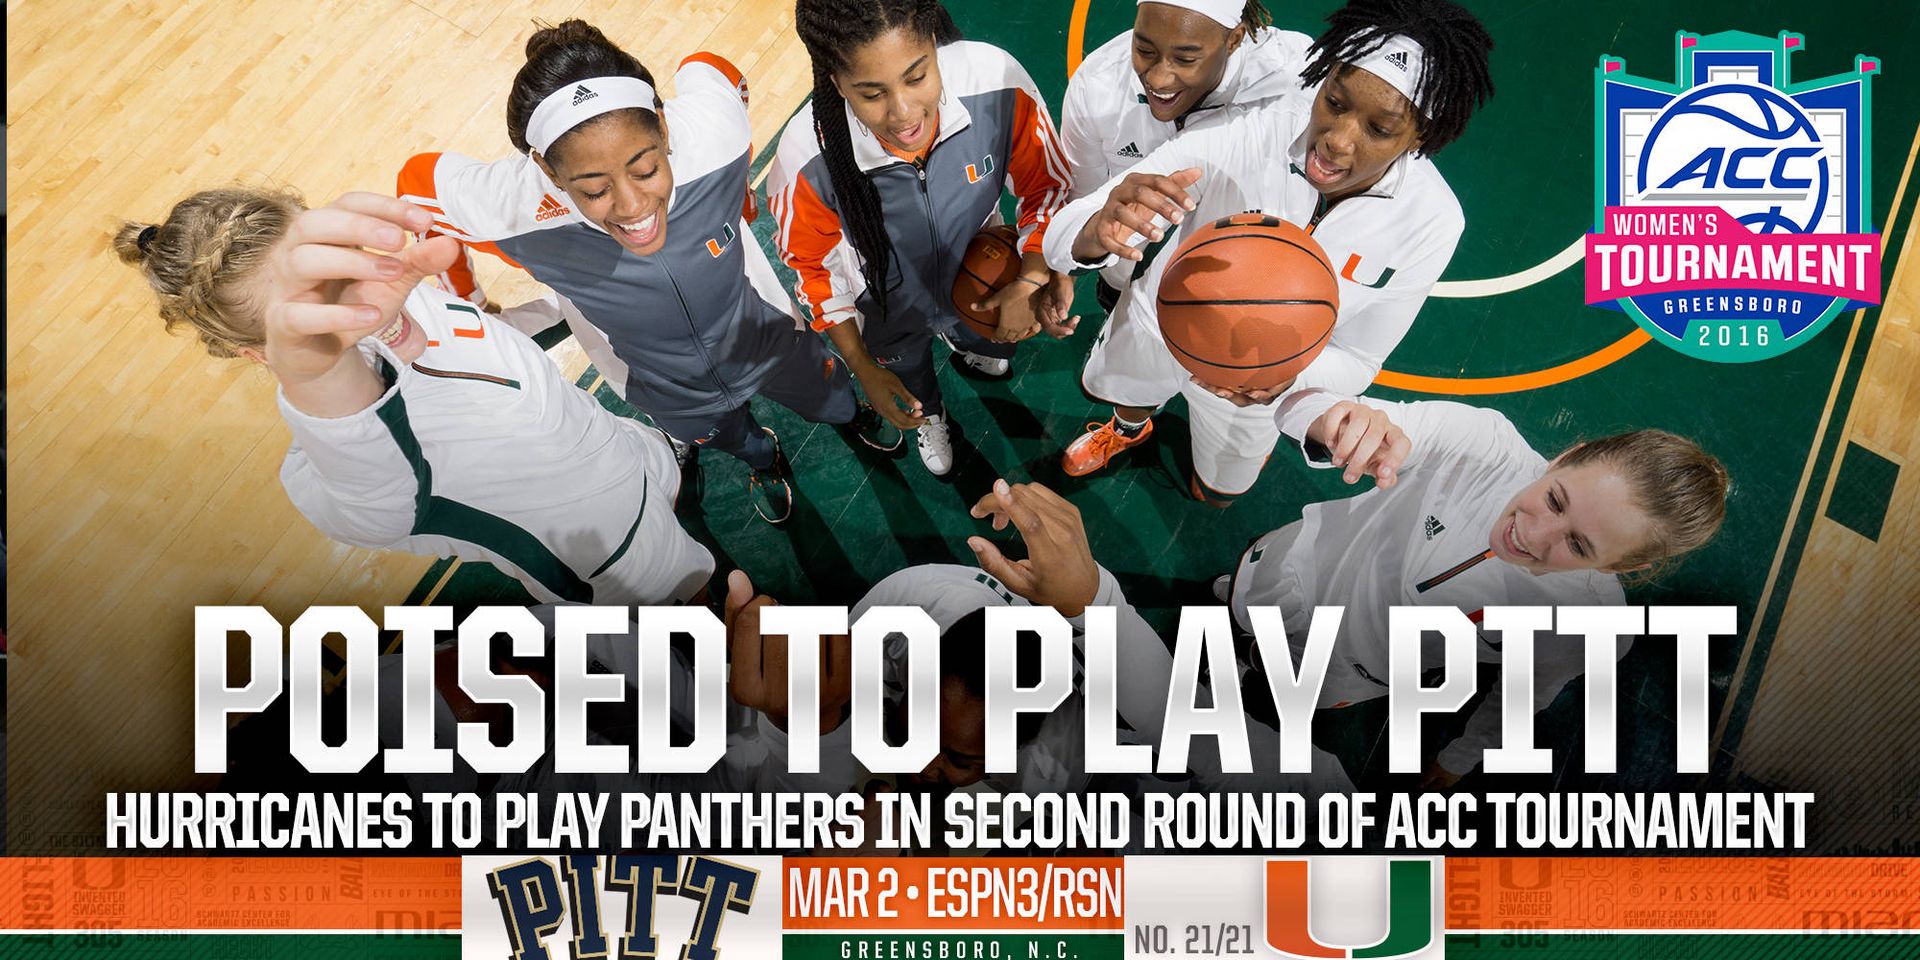 @CanesWBB Opens ACC Tournament vs. Pittsburgh